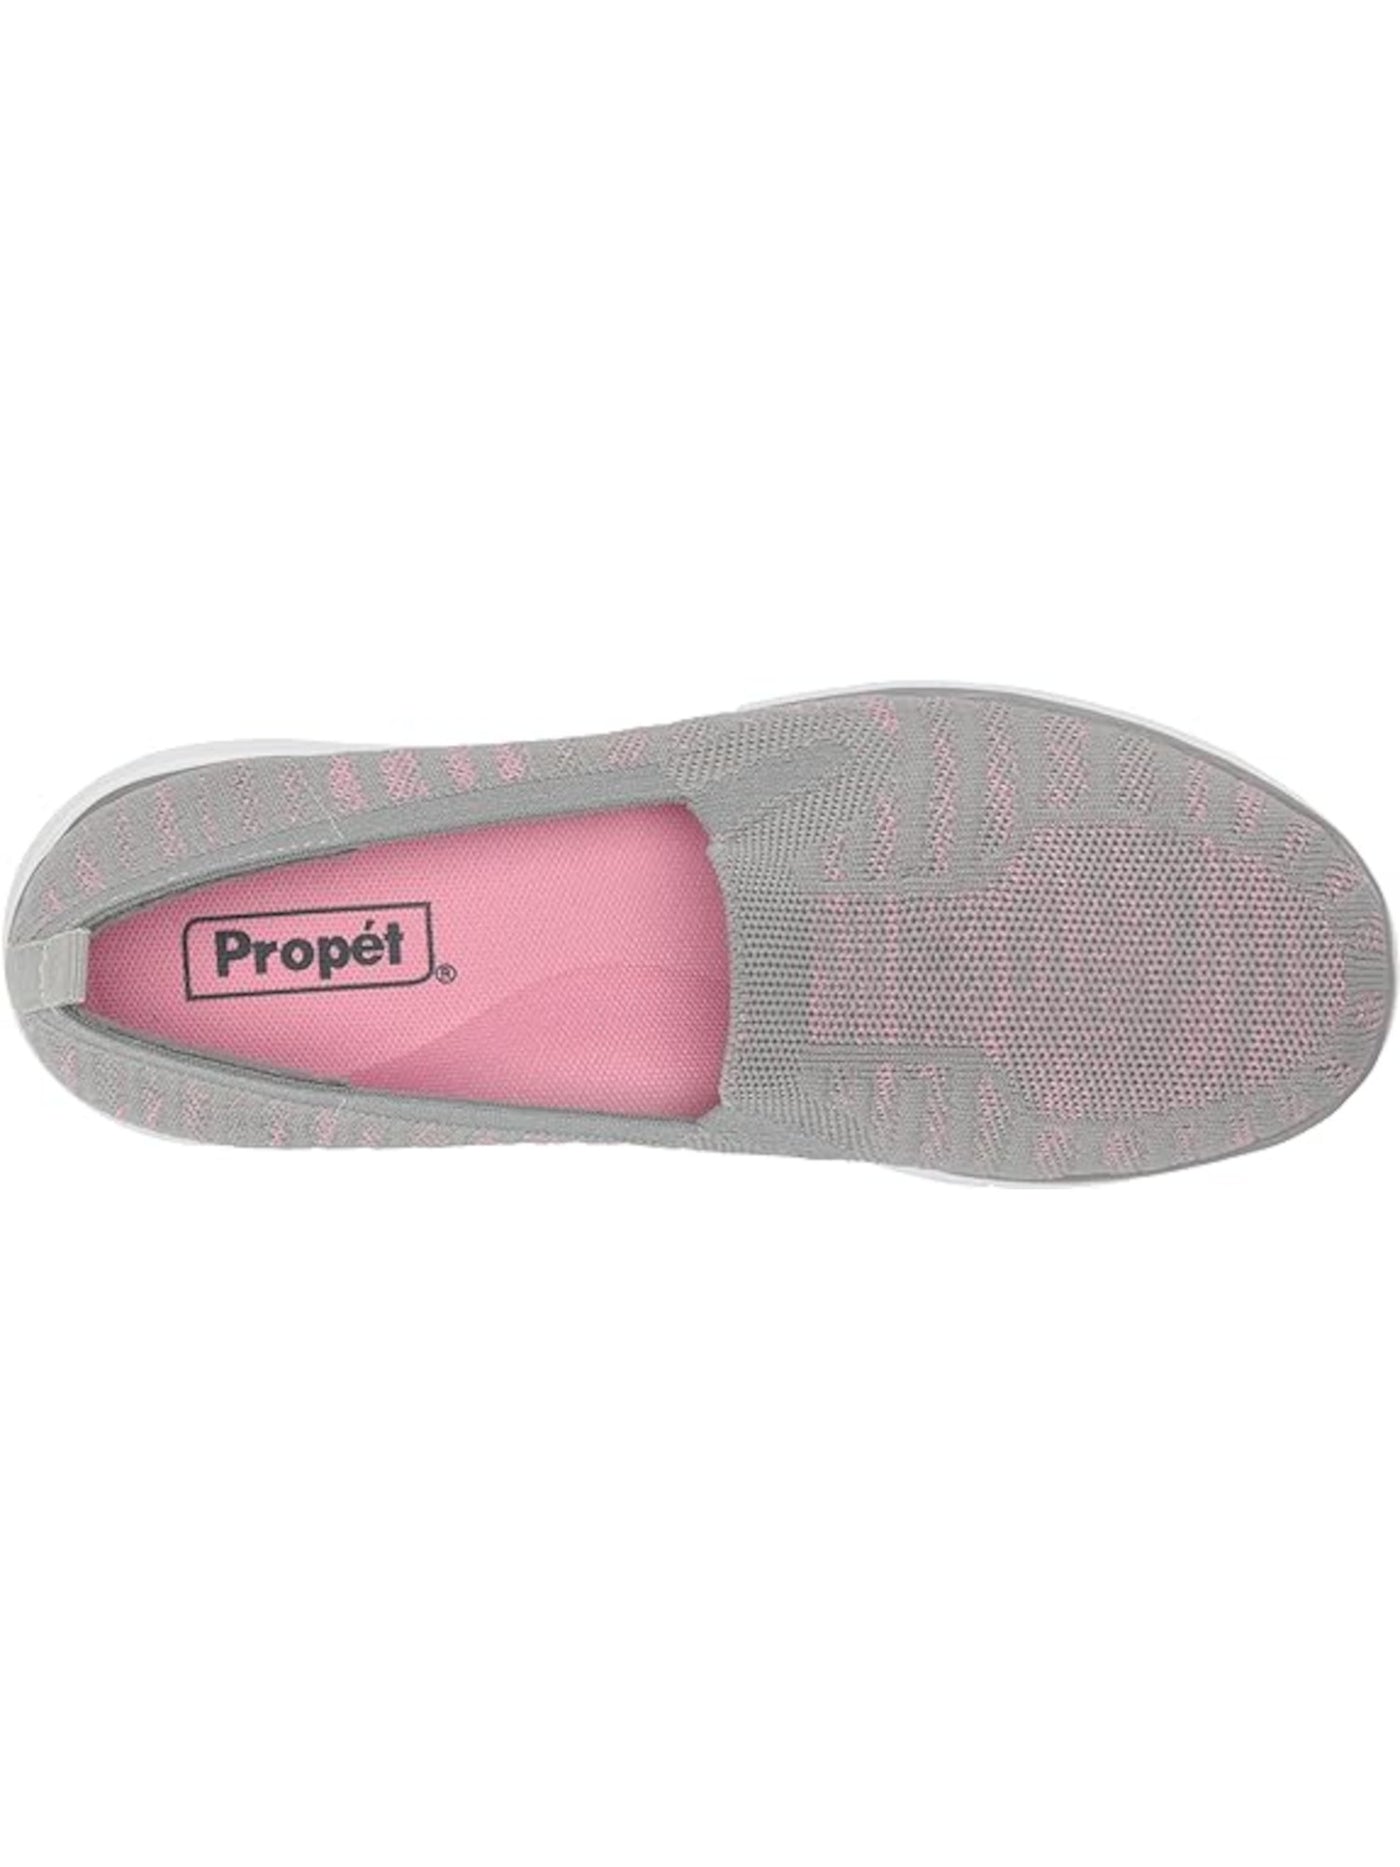 PROPET Womens Gray Mixed Knit Arch Support Padded Back Pull-Tab Breathable Removable Insole Travelfit Round Toe Wedge Slip On Sneakers Shoes 7.5 N